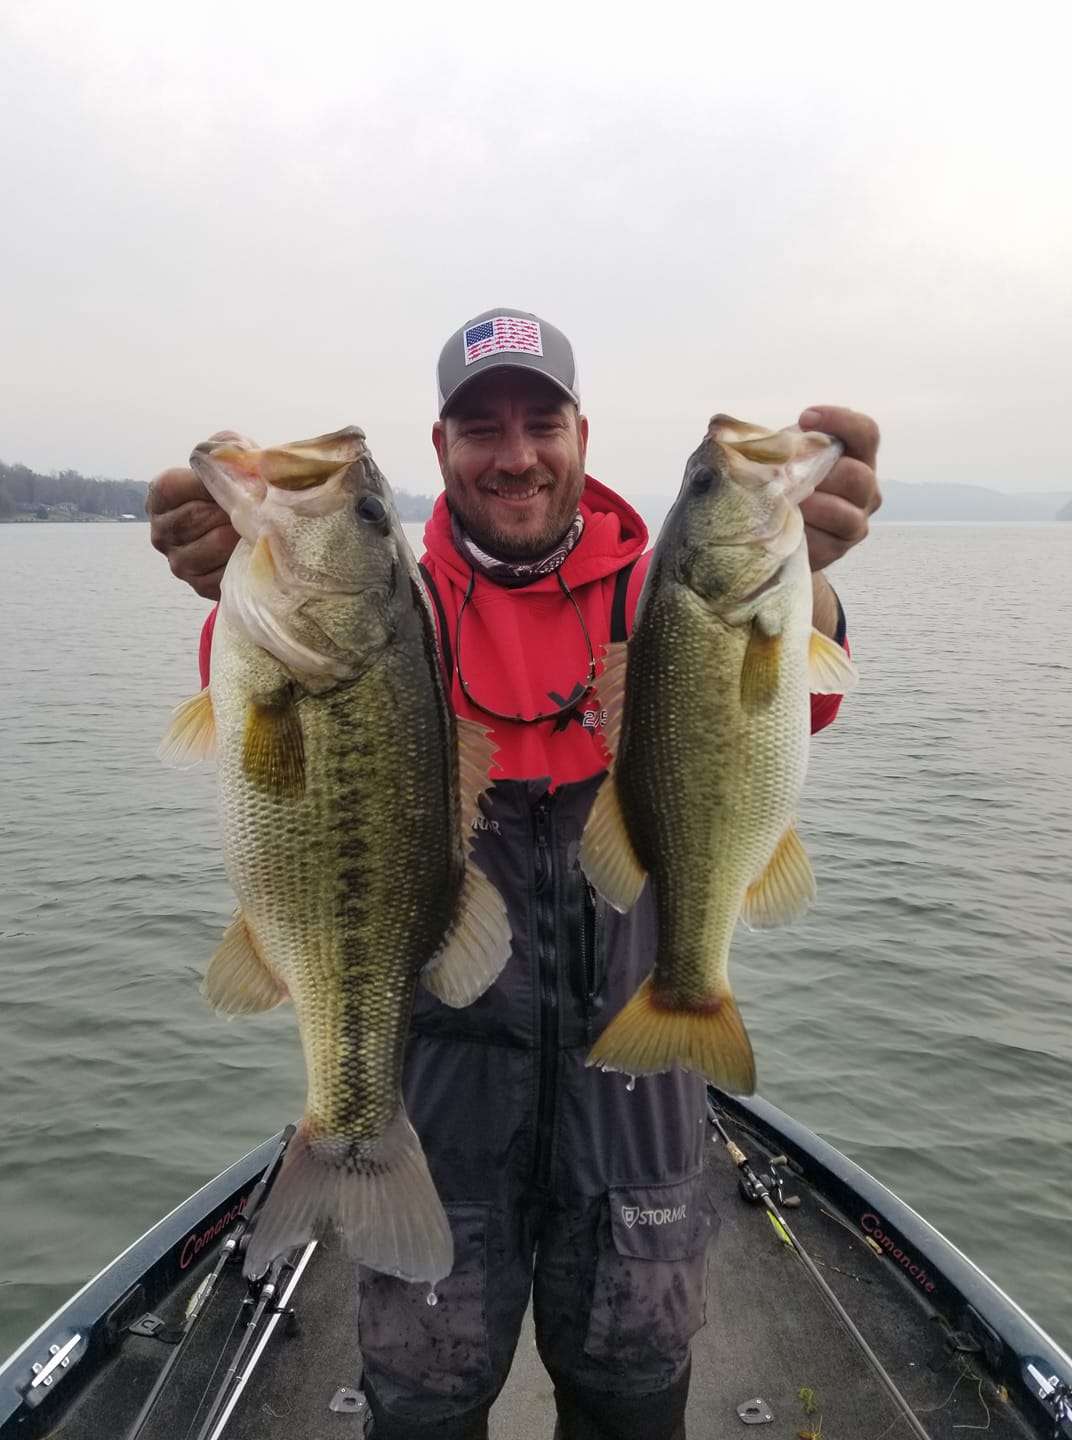 Joshua Perrymon doubled up with a 6.7 and 3.5 caught on Guntersville throwing a hogfarmer a rig.